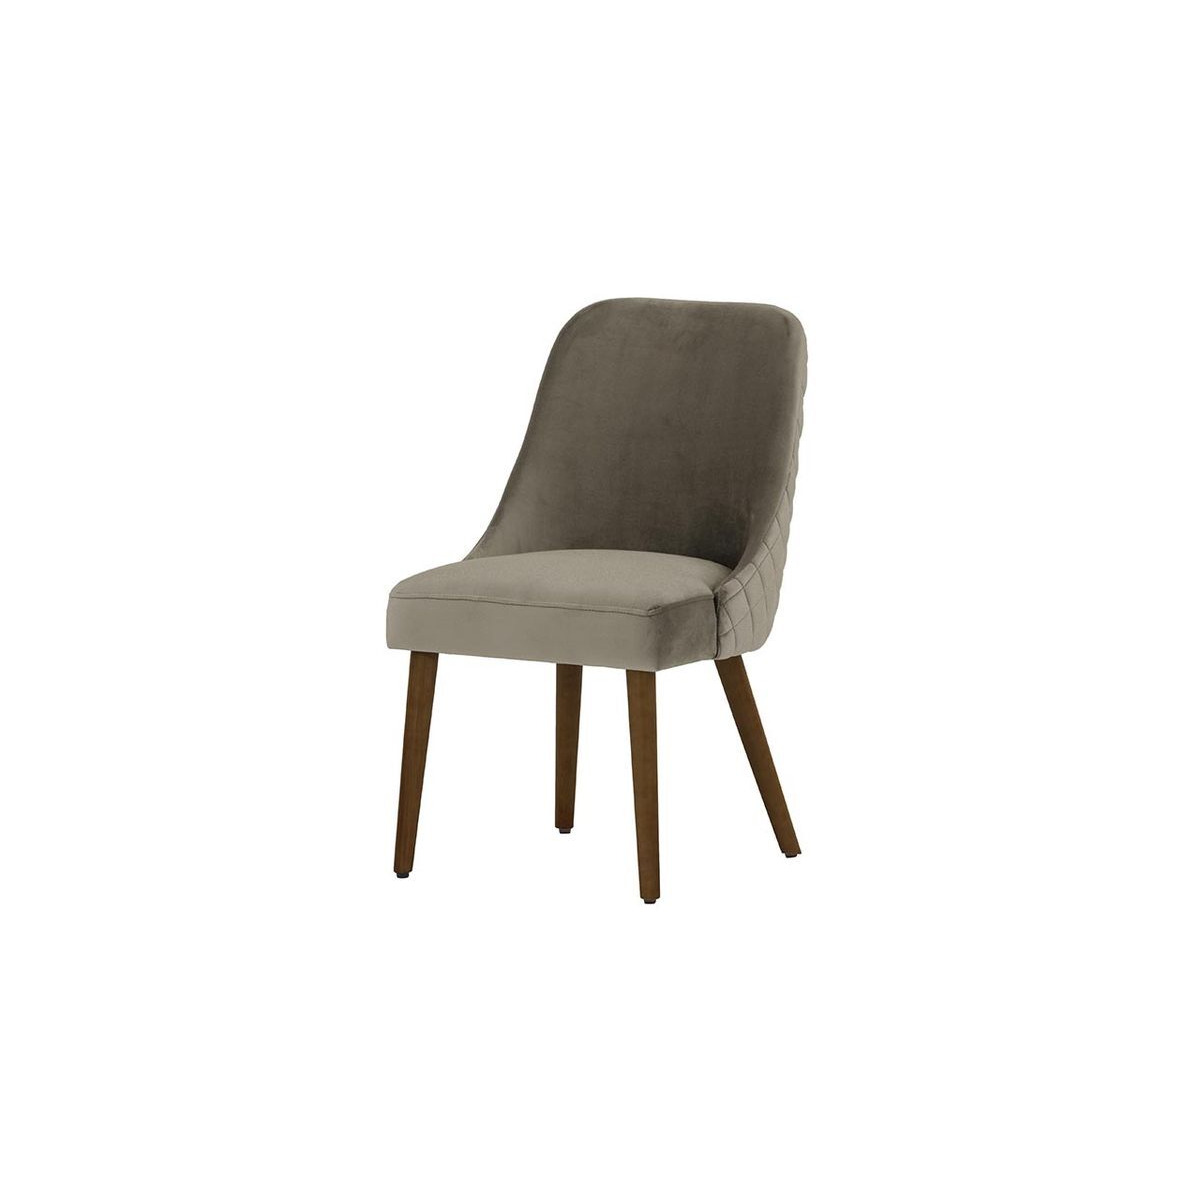 Albion Dining Chair with Stitching, grey, Leg colour: dark oak - image 1